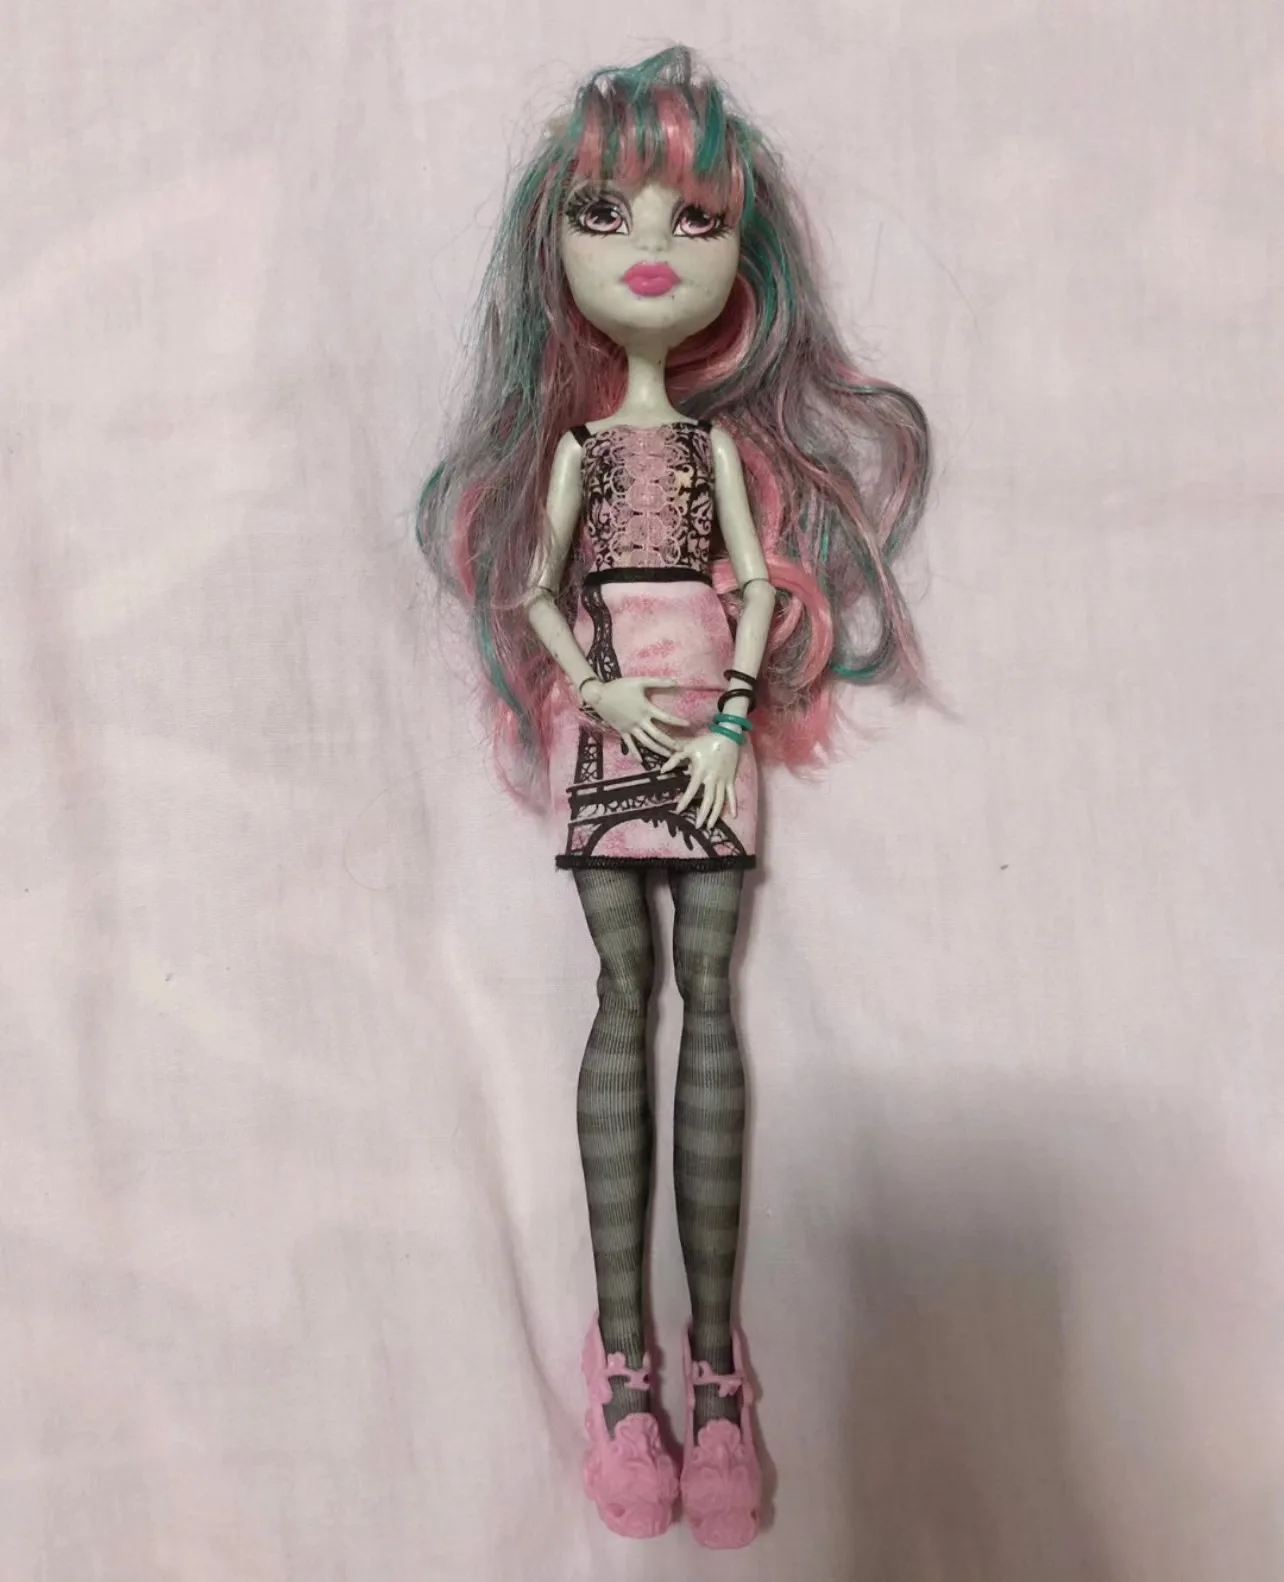 Monster High Dolls: A Phenomenon of Creativity and Inclusion